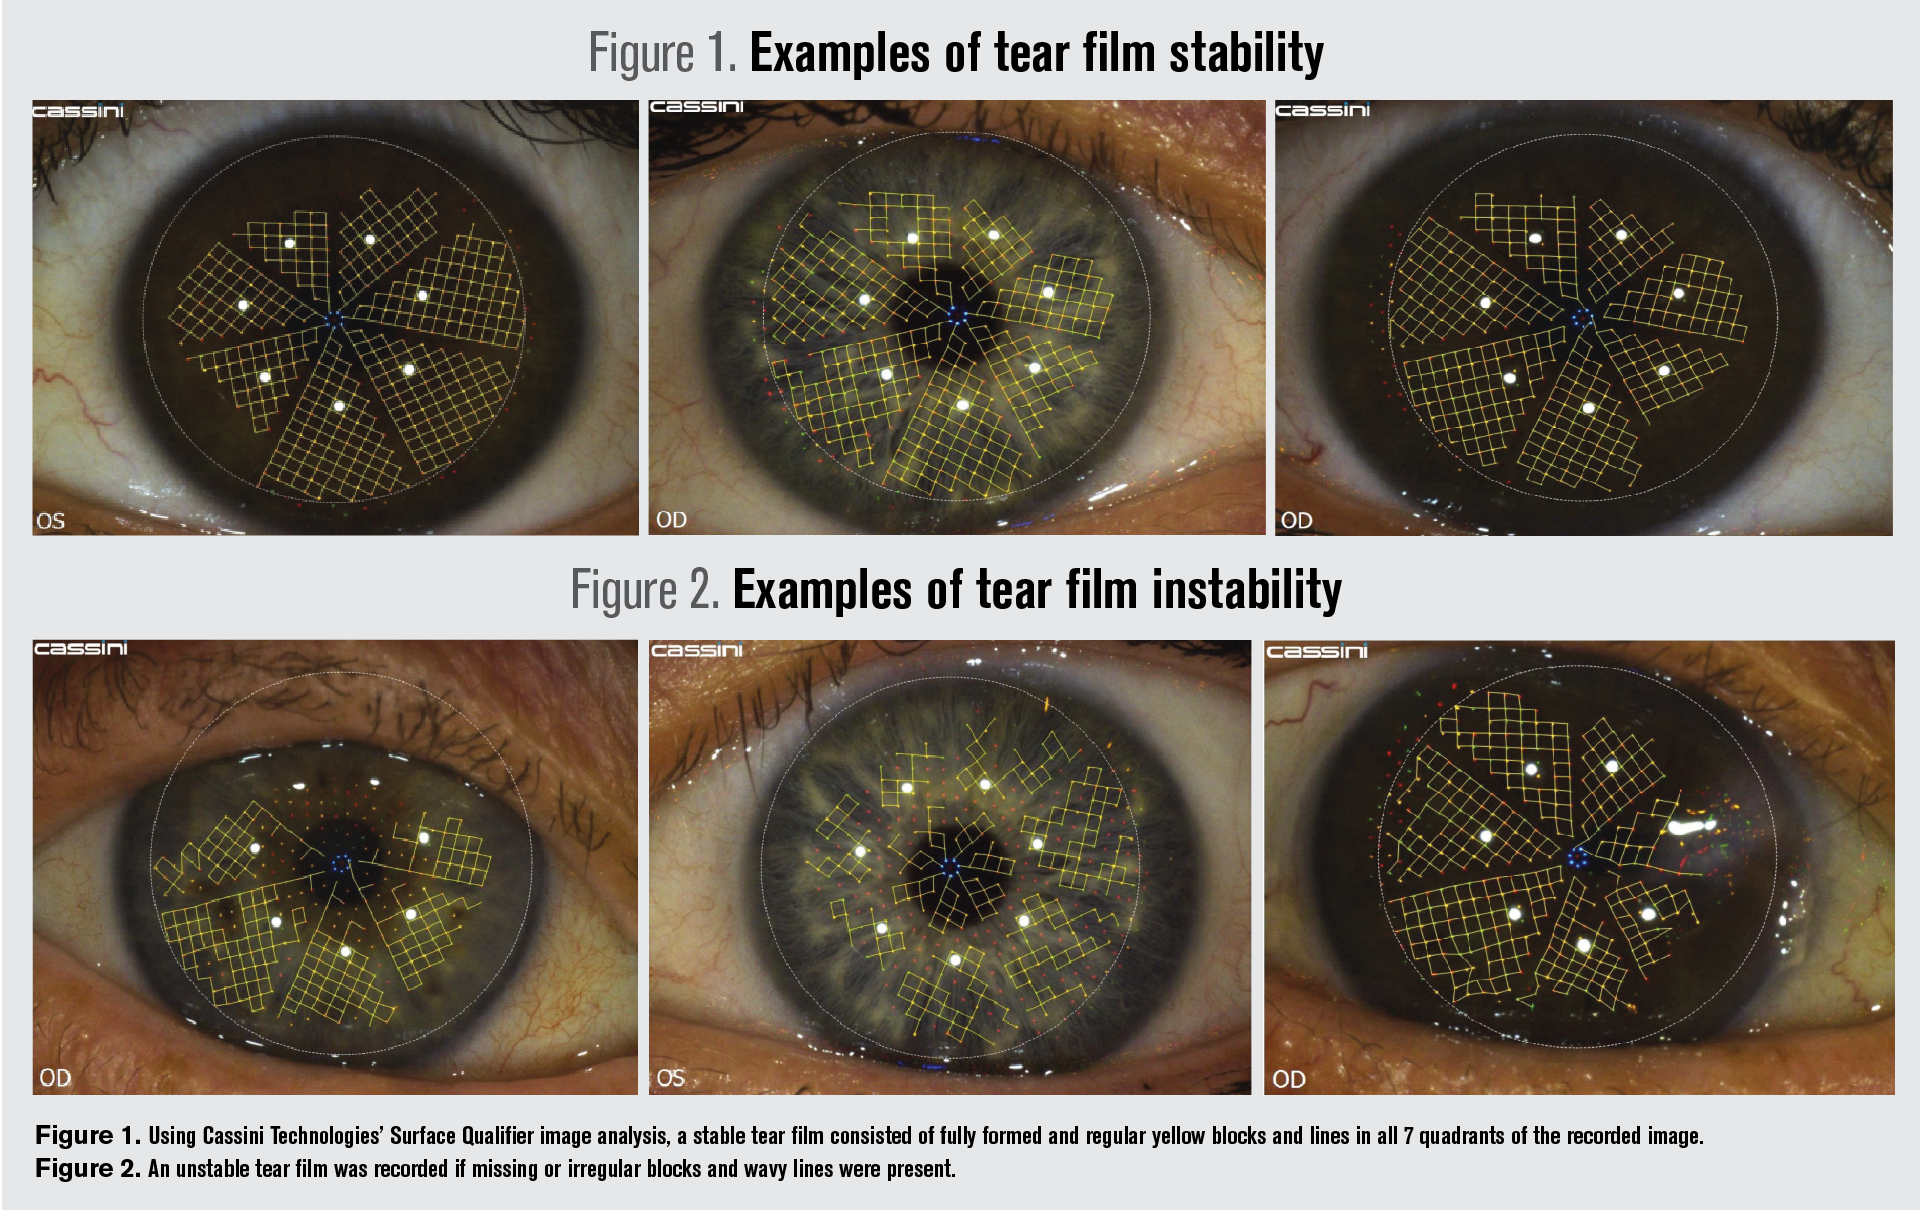 How the tear film affects IOL measurements